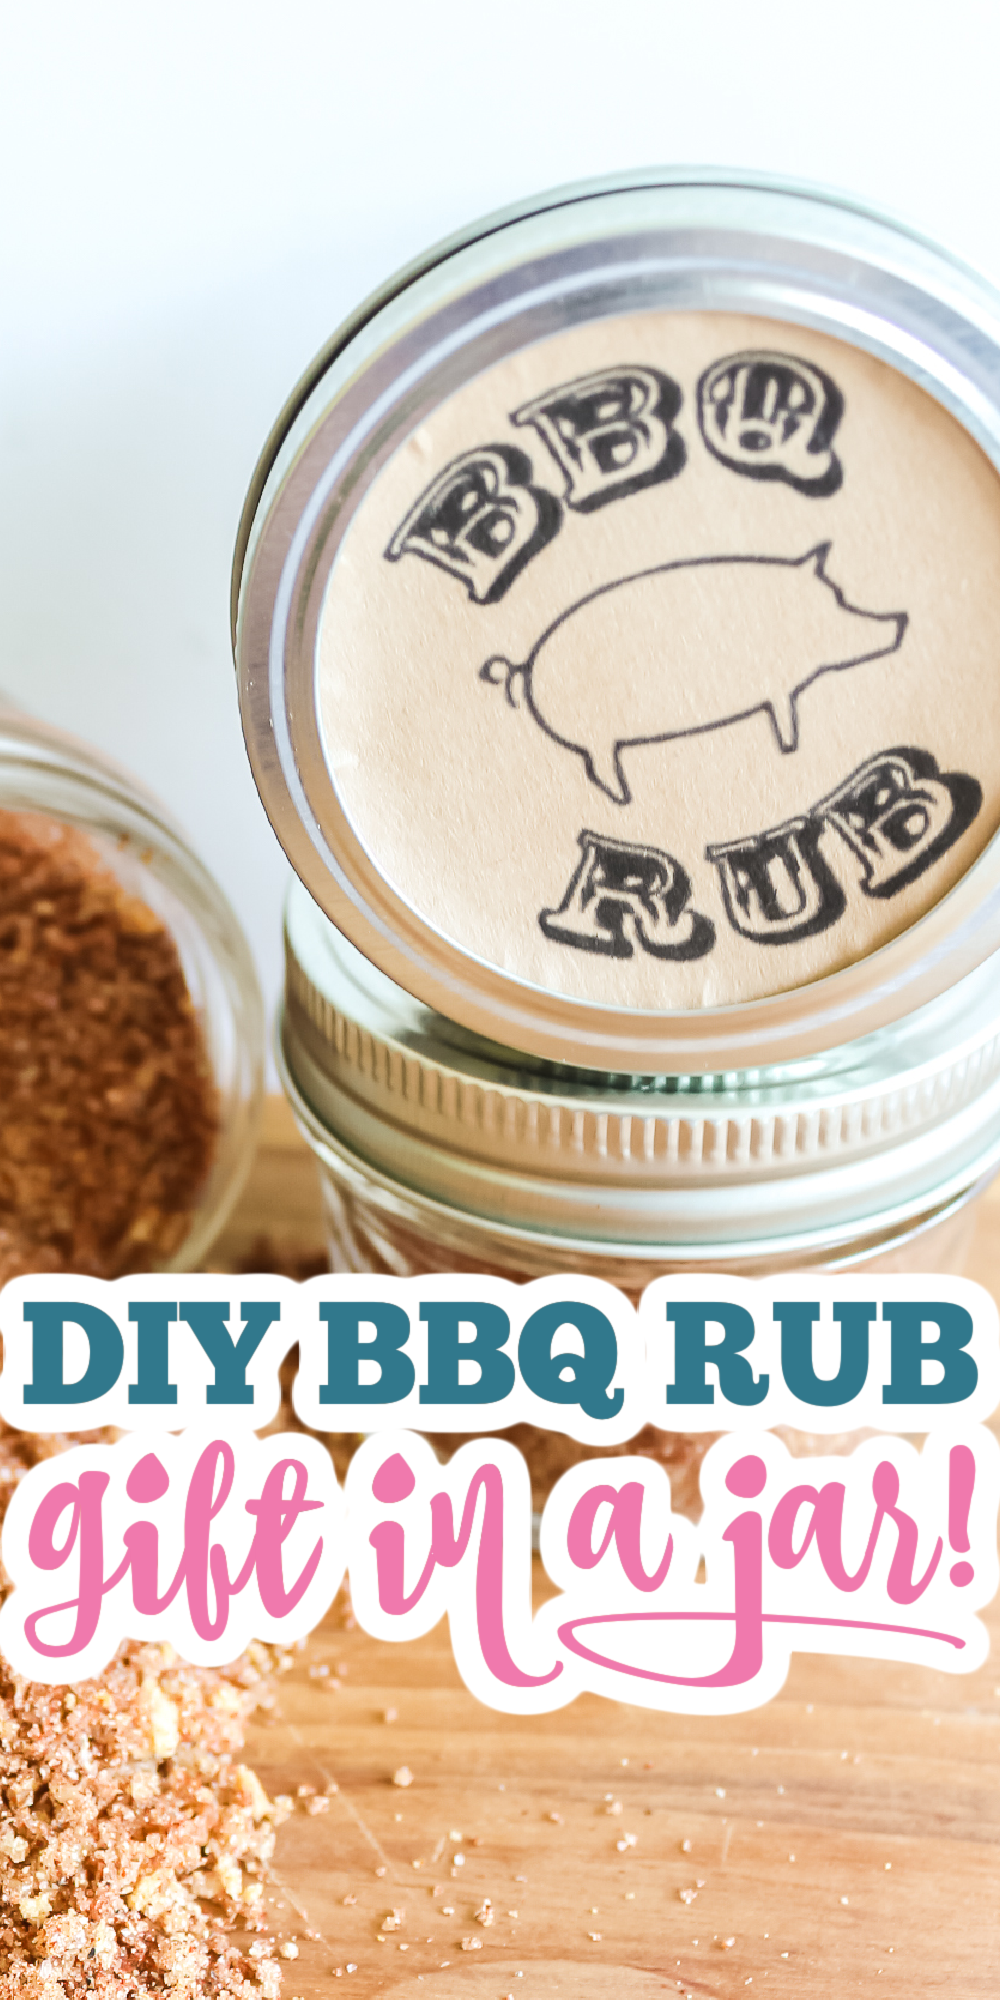 Make Dad a DIY BBQ Rub Gift this Father's Day